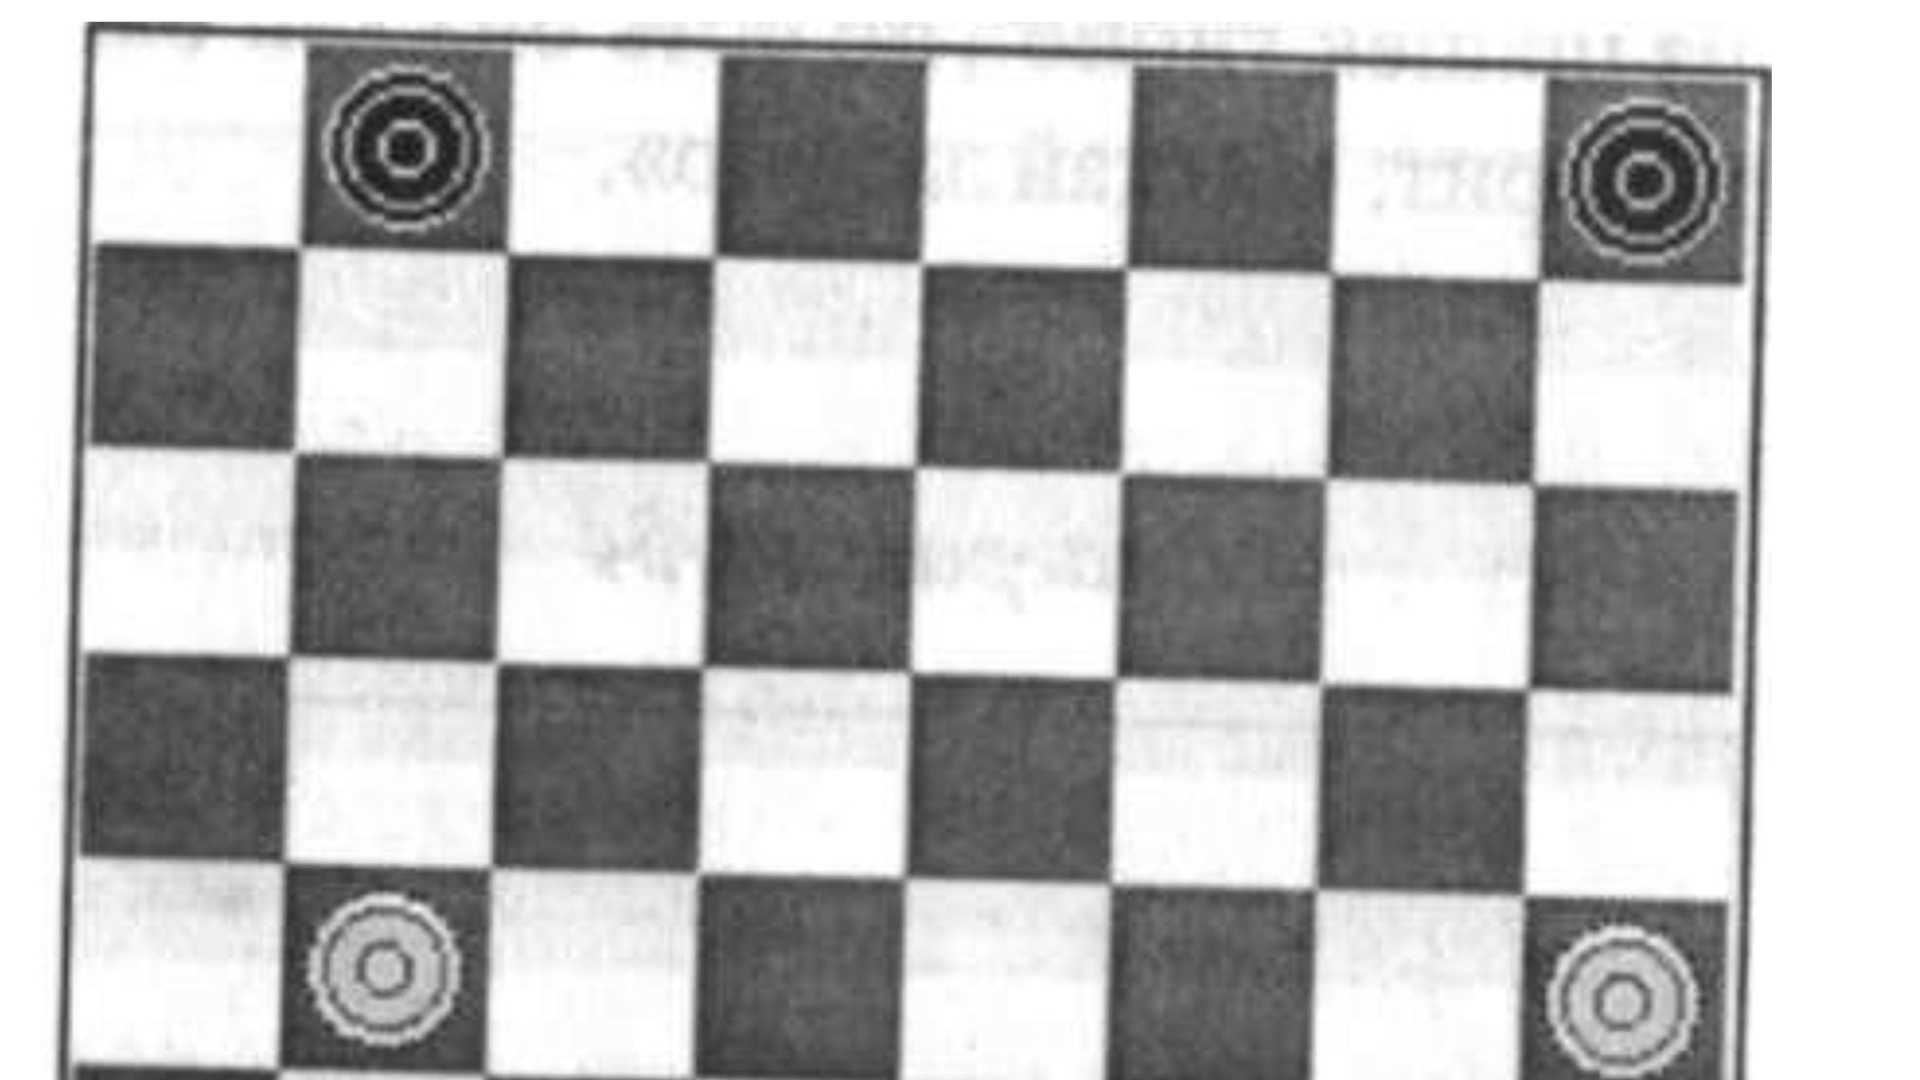 A few simple checkers concepts... - Checkers, Advice, Checkerboard, Basic concepts, Longpost